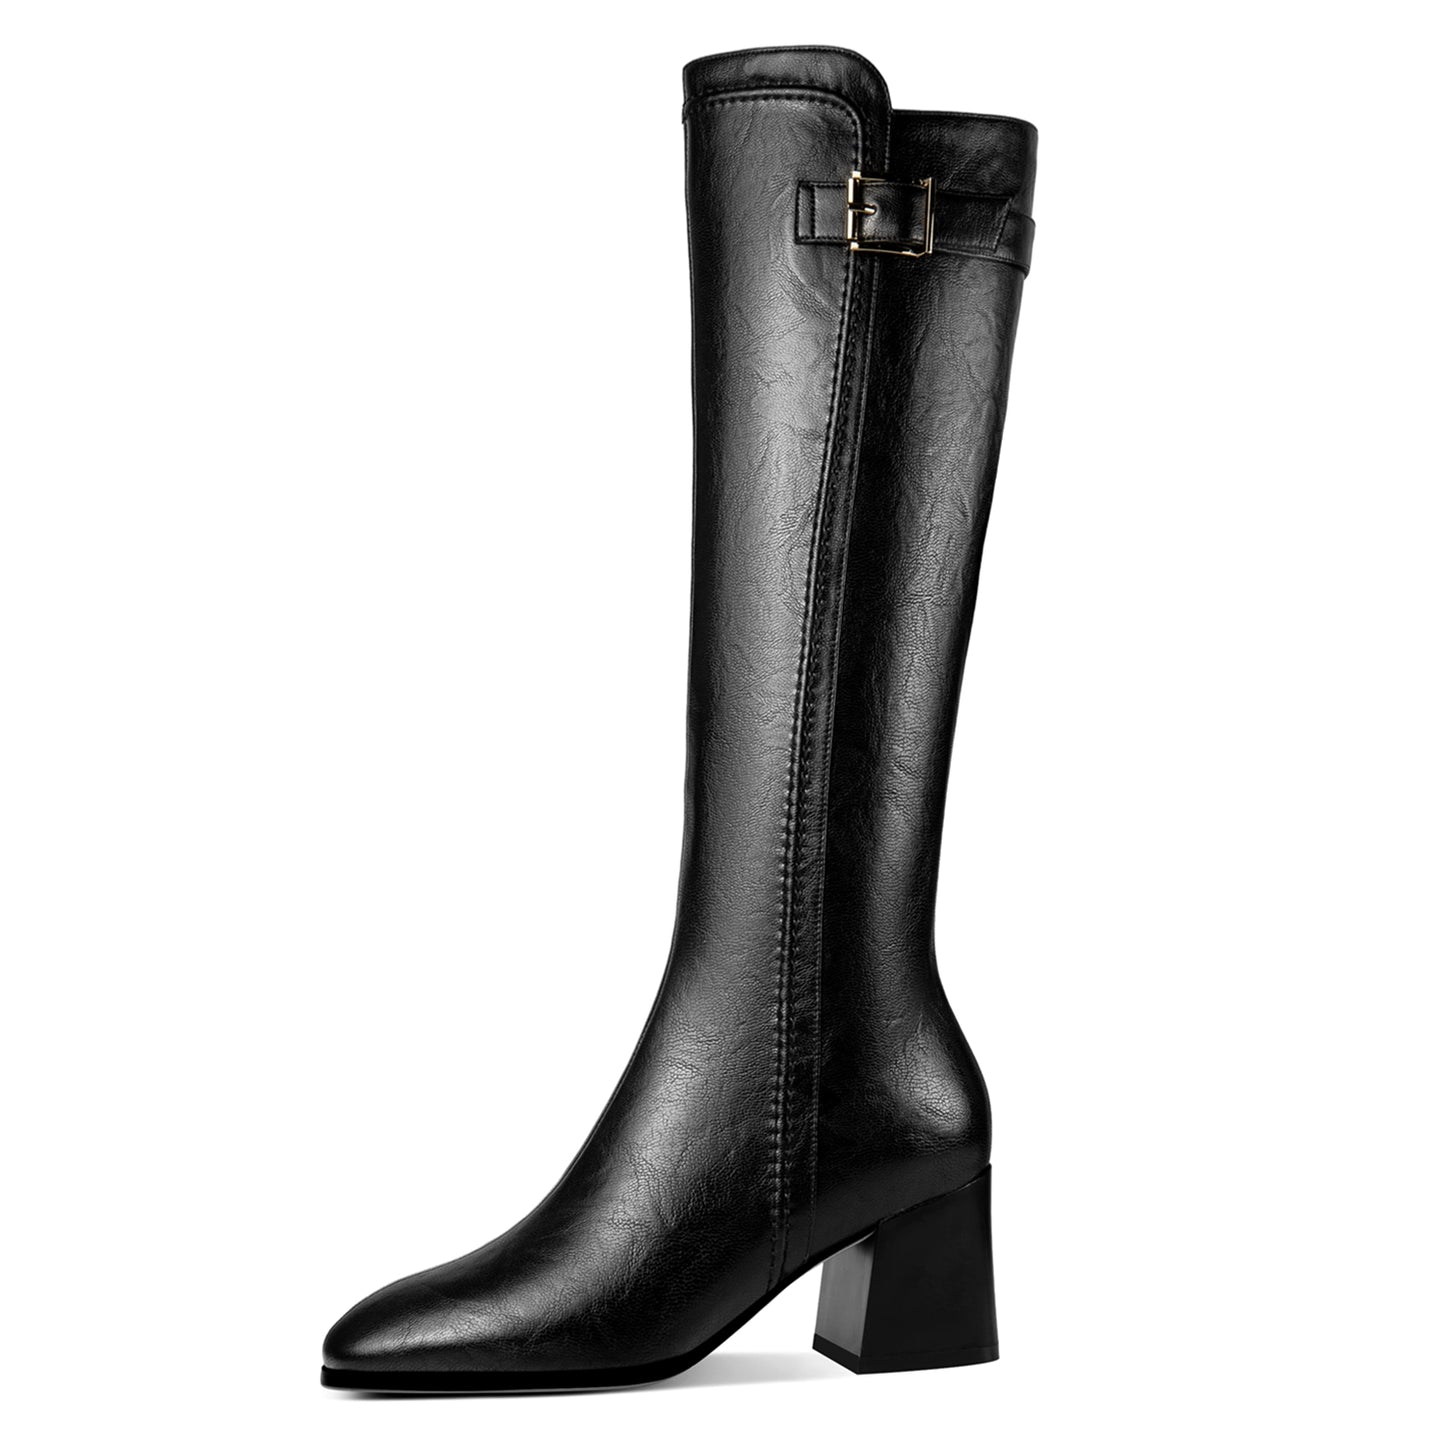 TinaCus Handmade Women's Genuine Leather Square Toe Chunky Heel  Zip Up Knee High Boots with Buckle